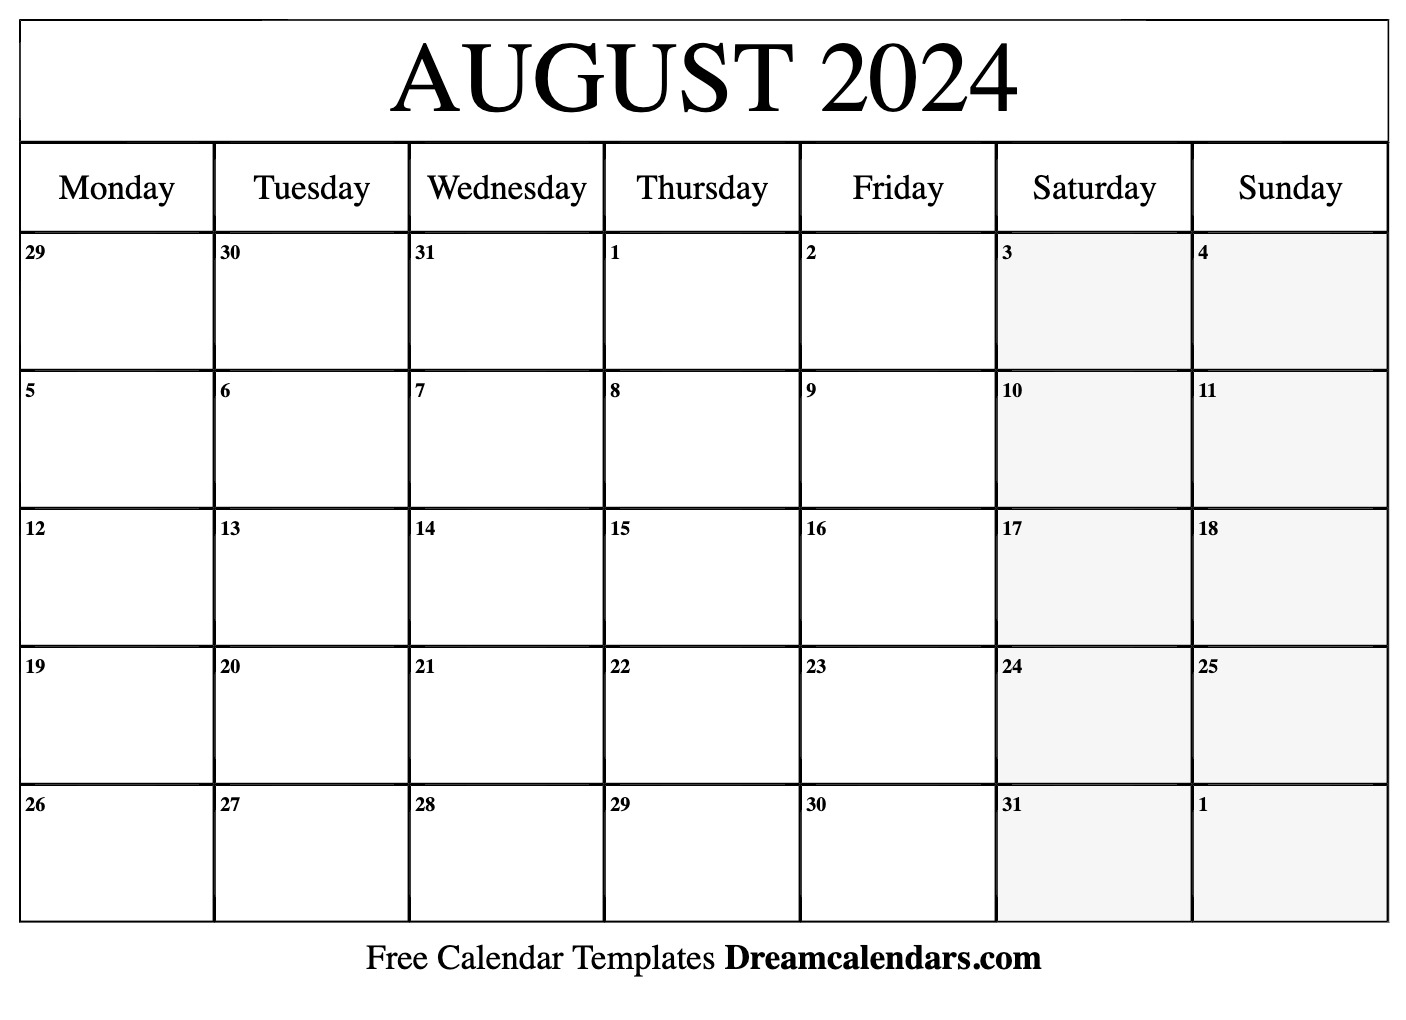 August 2024 Calendar | Free Blank Printable With Holidays for Free Printable Calendar June July August 2024